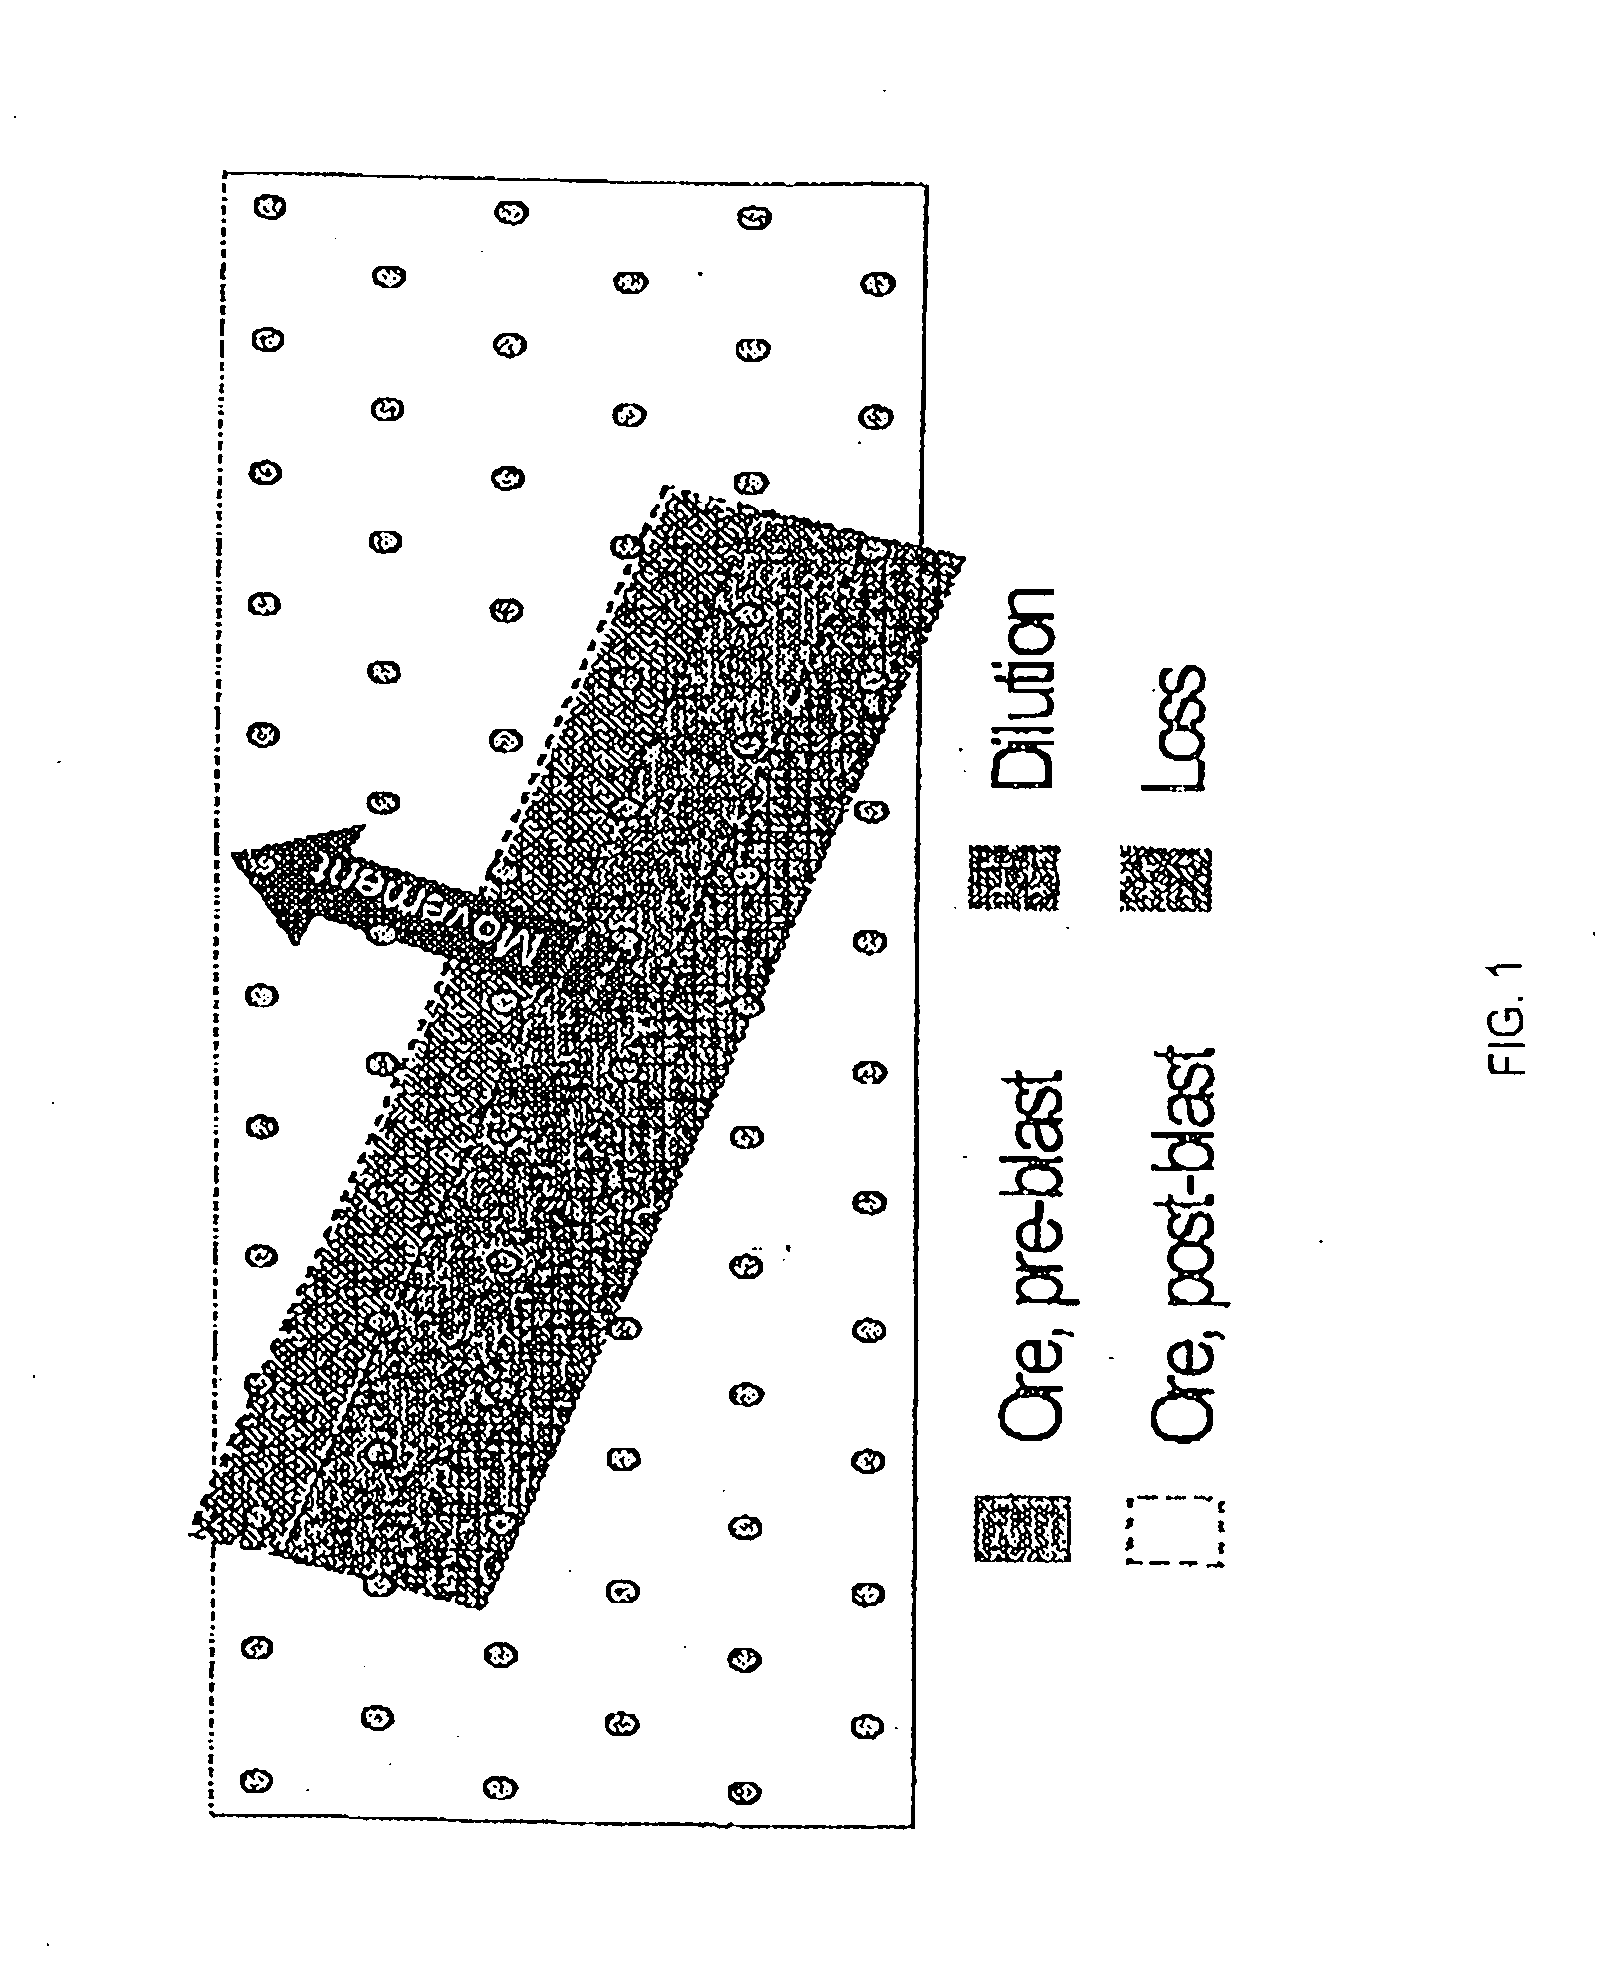 Blast movement monitor and method for determining the movement of a blast movement monitor and associated rock as a result of blasting operations